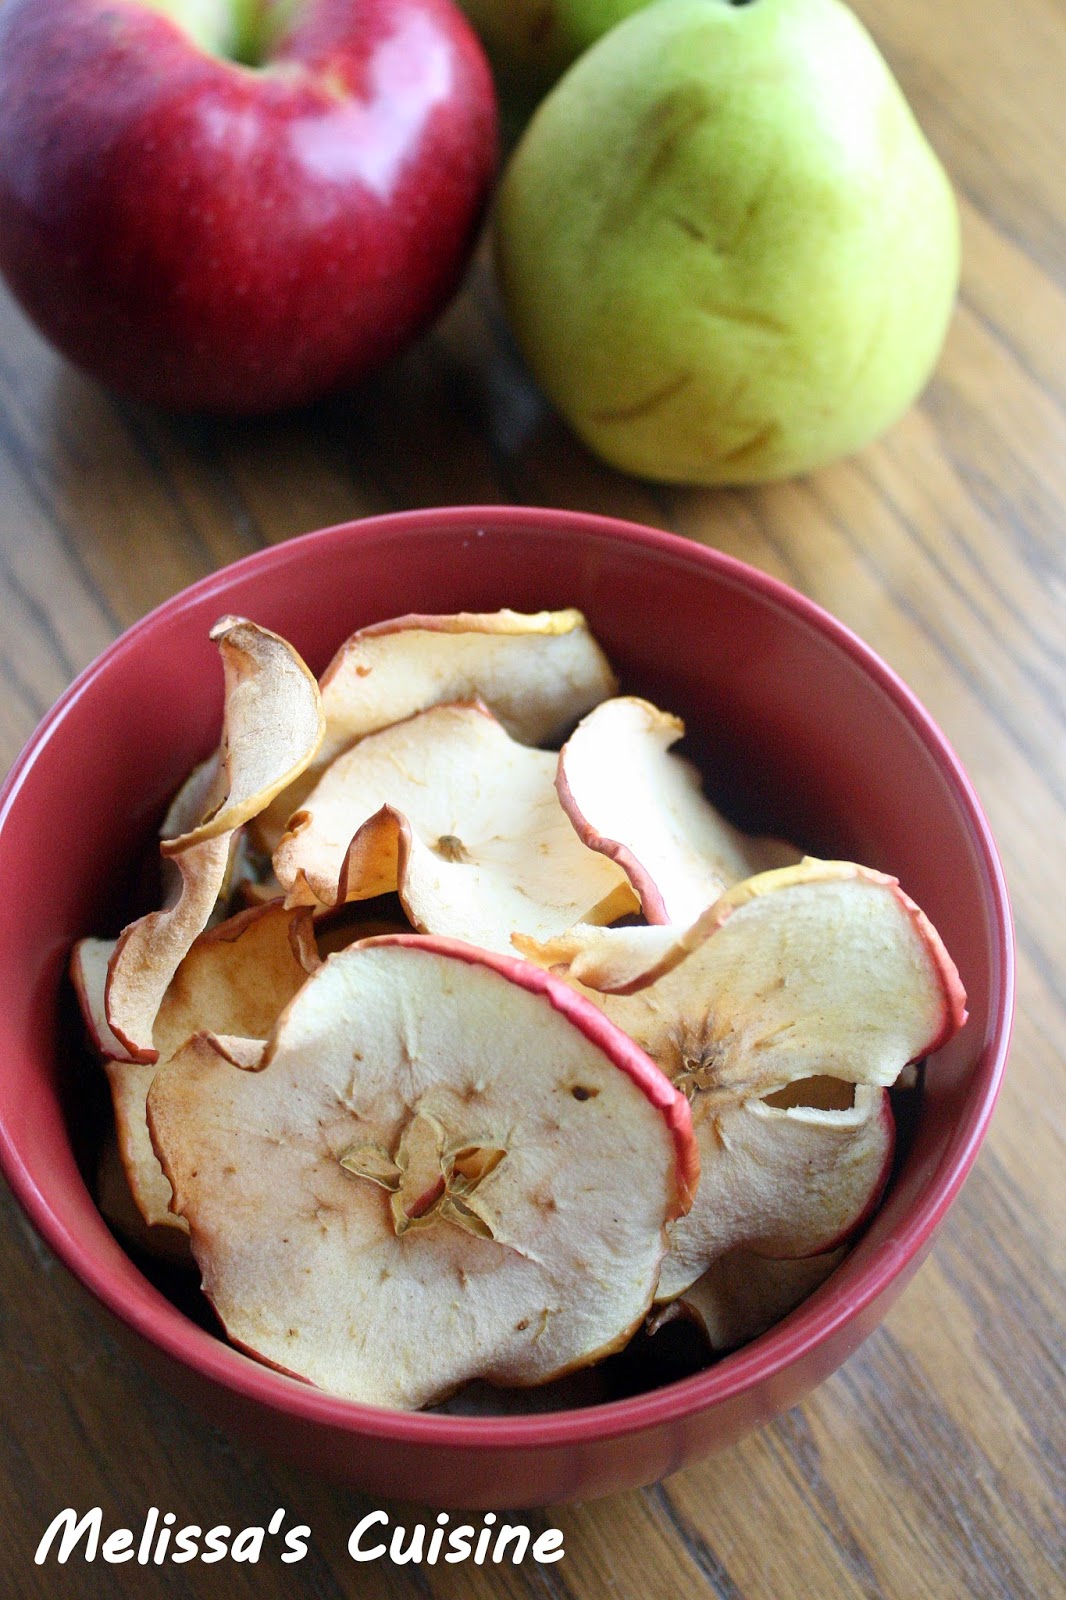 Melissa's Cuisine: Ginger Pear and Apple Chips